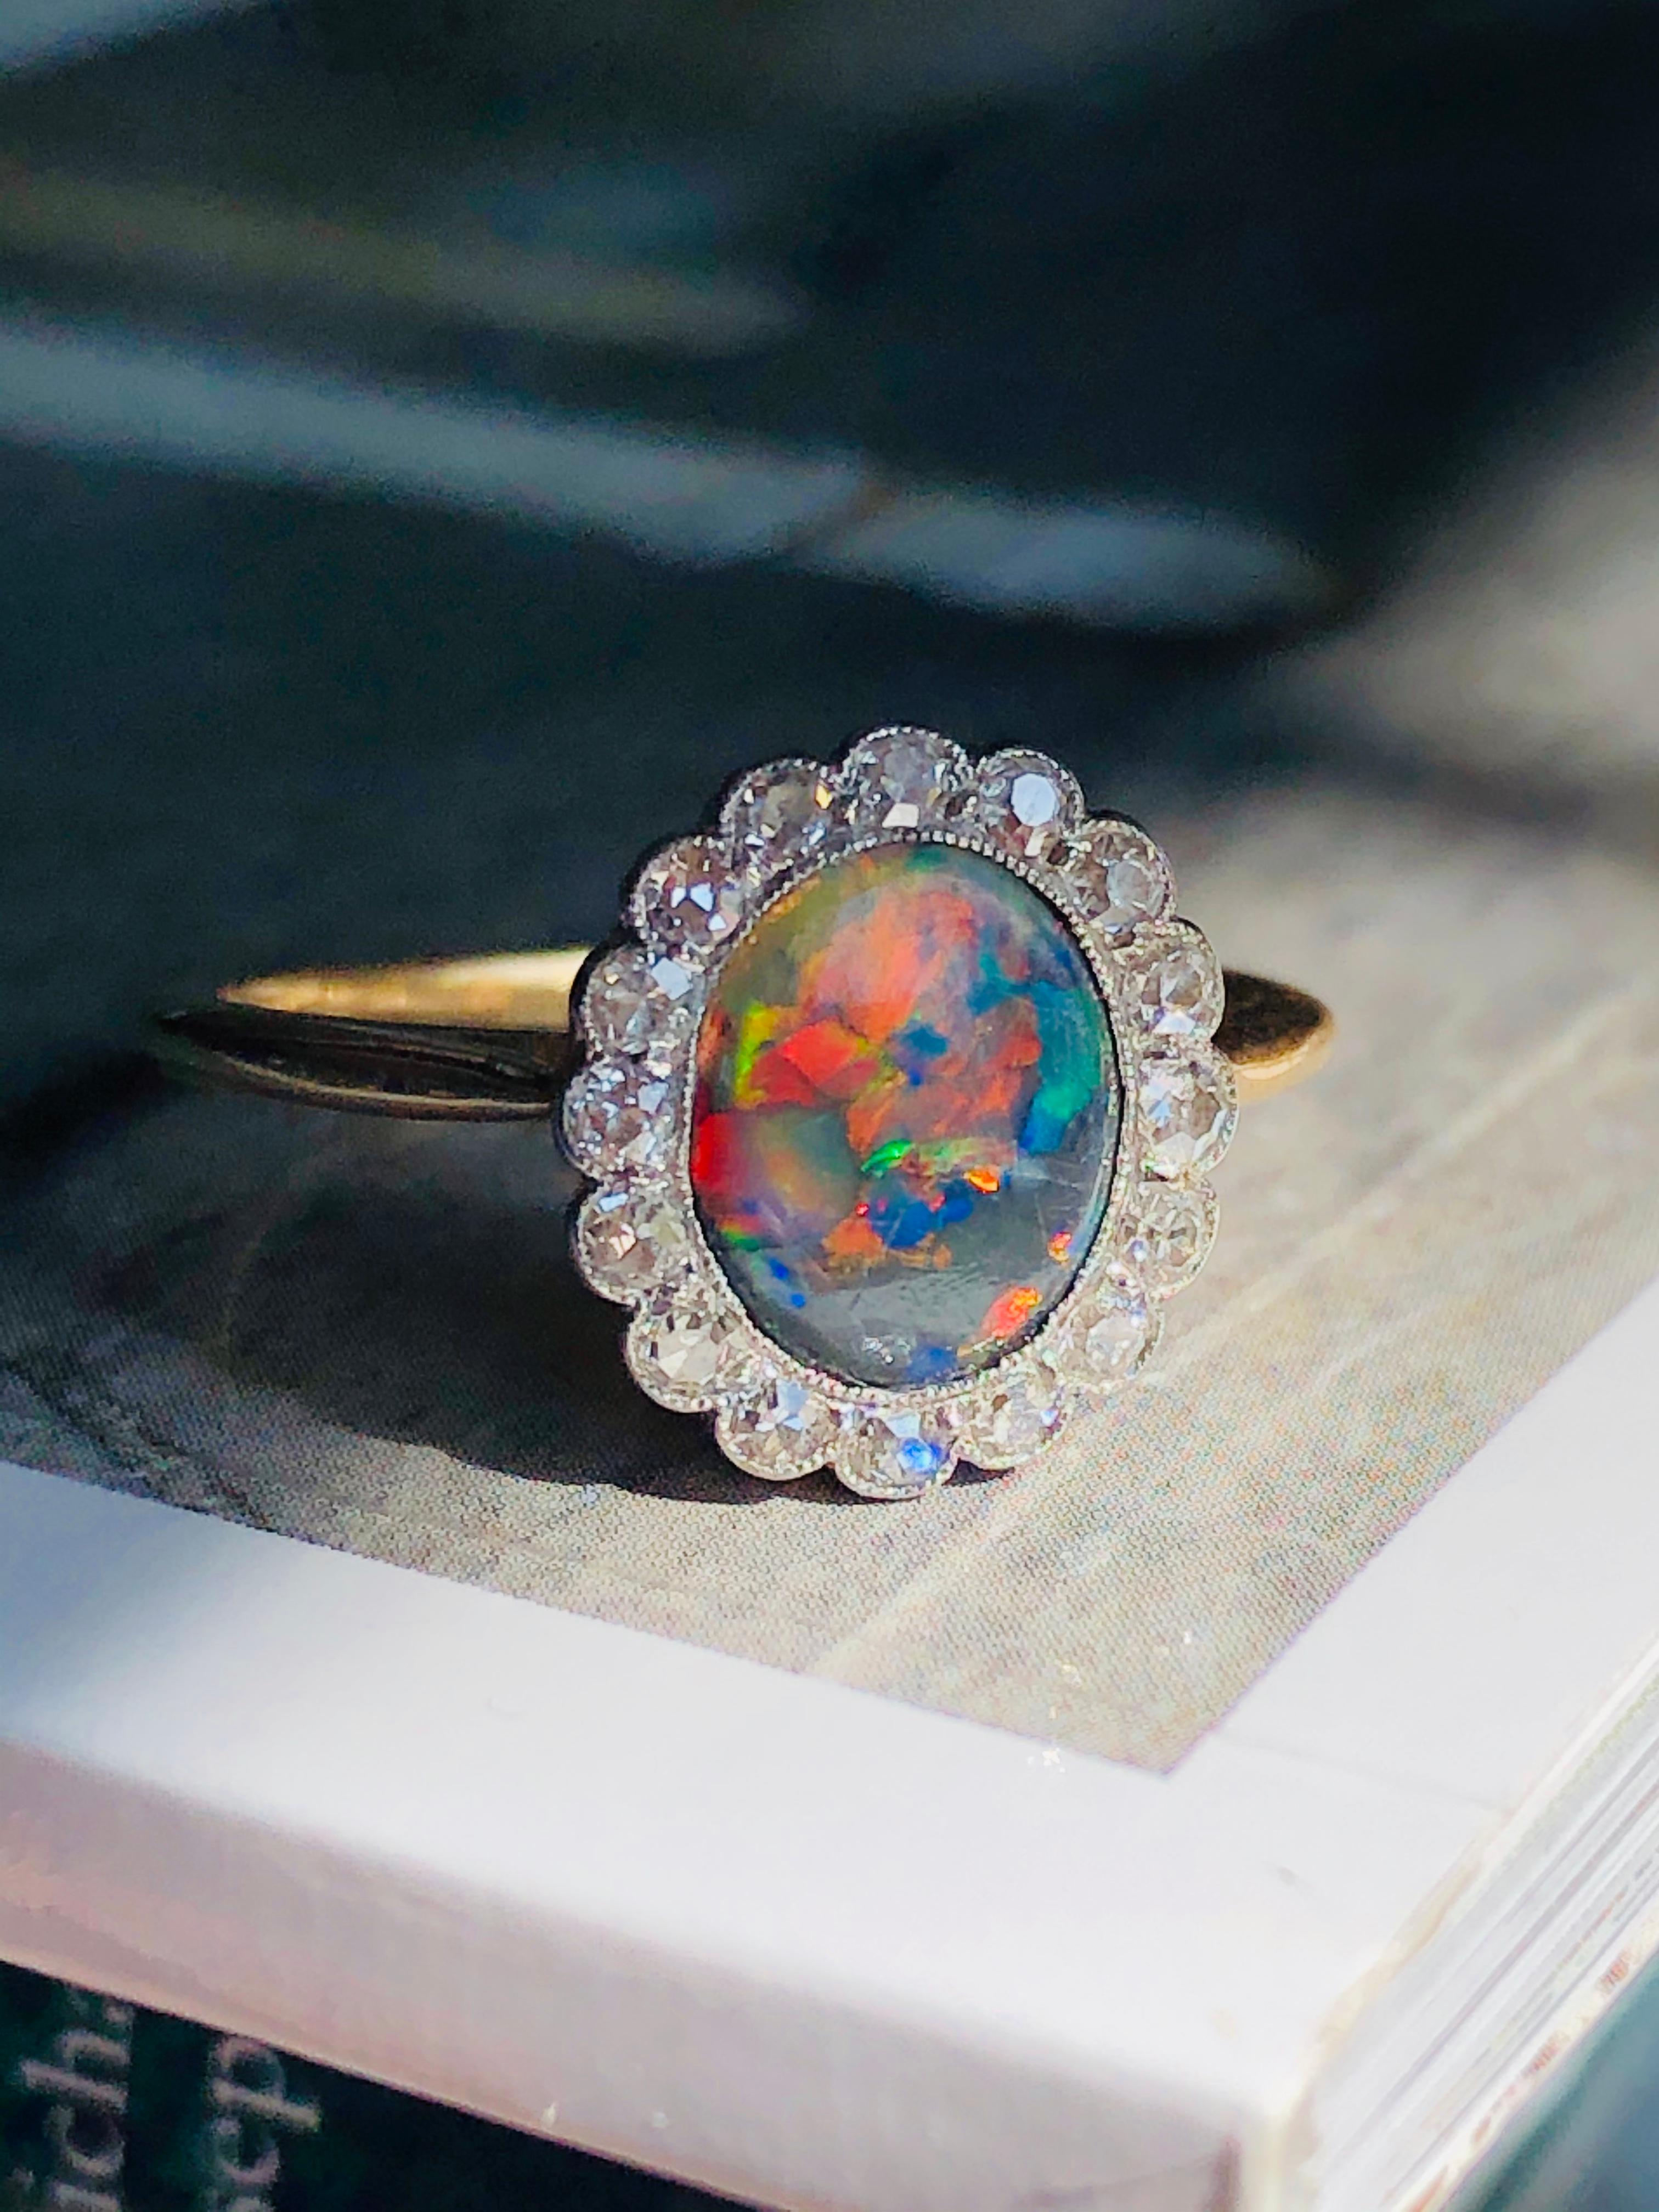 Black Opal and Diamond Ring. Collet-set with an oval black opal, displaying a superb play of colour against a dark grey background. Opal iridescence is caused by light interacting with an extremely fine network of silicon dioxide spheres within the